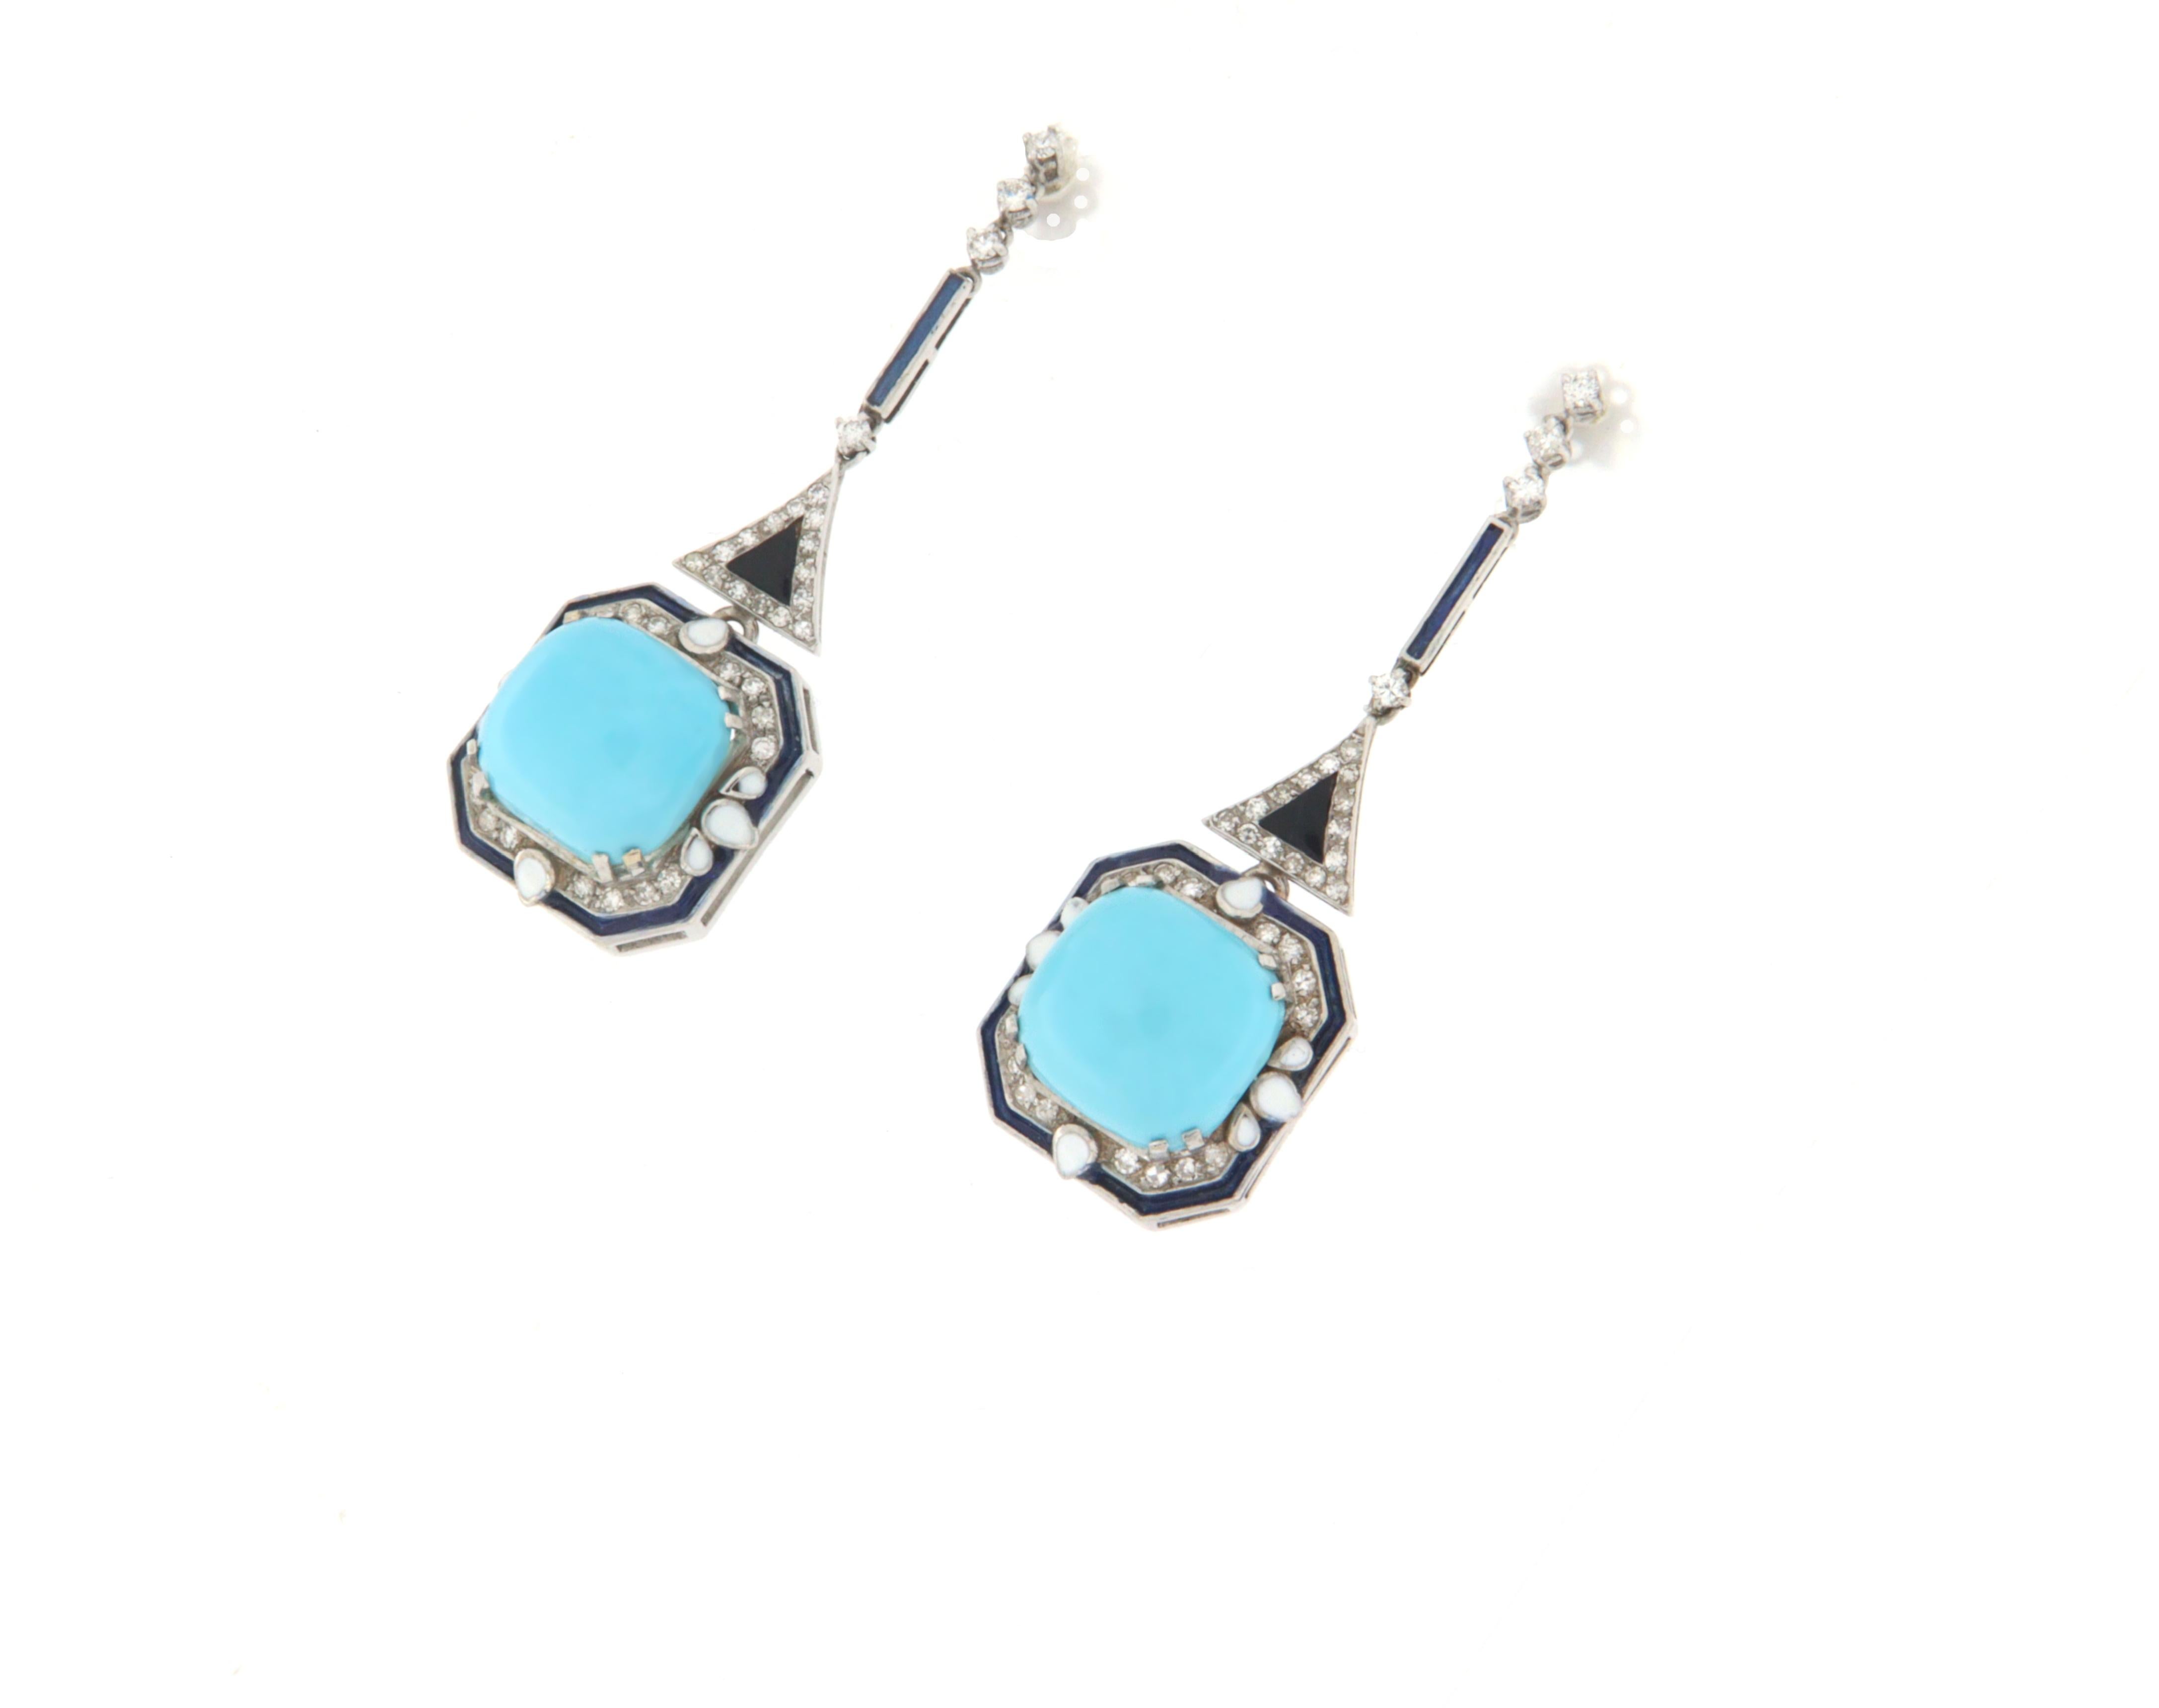 Elegant earring handmade by expert craftsmen in 18K white gold mounted with diamonds, Arizona origin turquoise, onyx and white and blue enamels.

The total weight of the earring is 20.4 grams

The weight of the diamonds is equivalent to 1.08